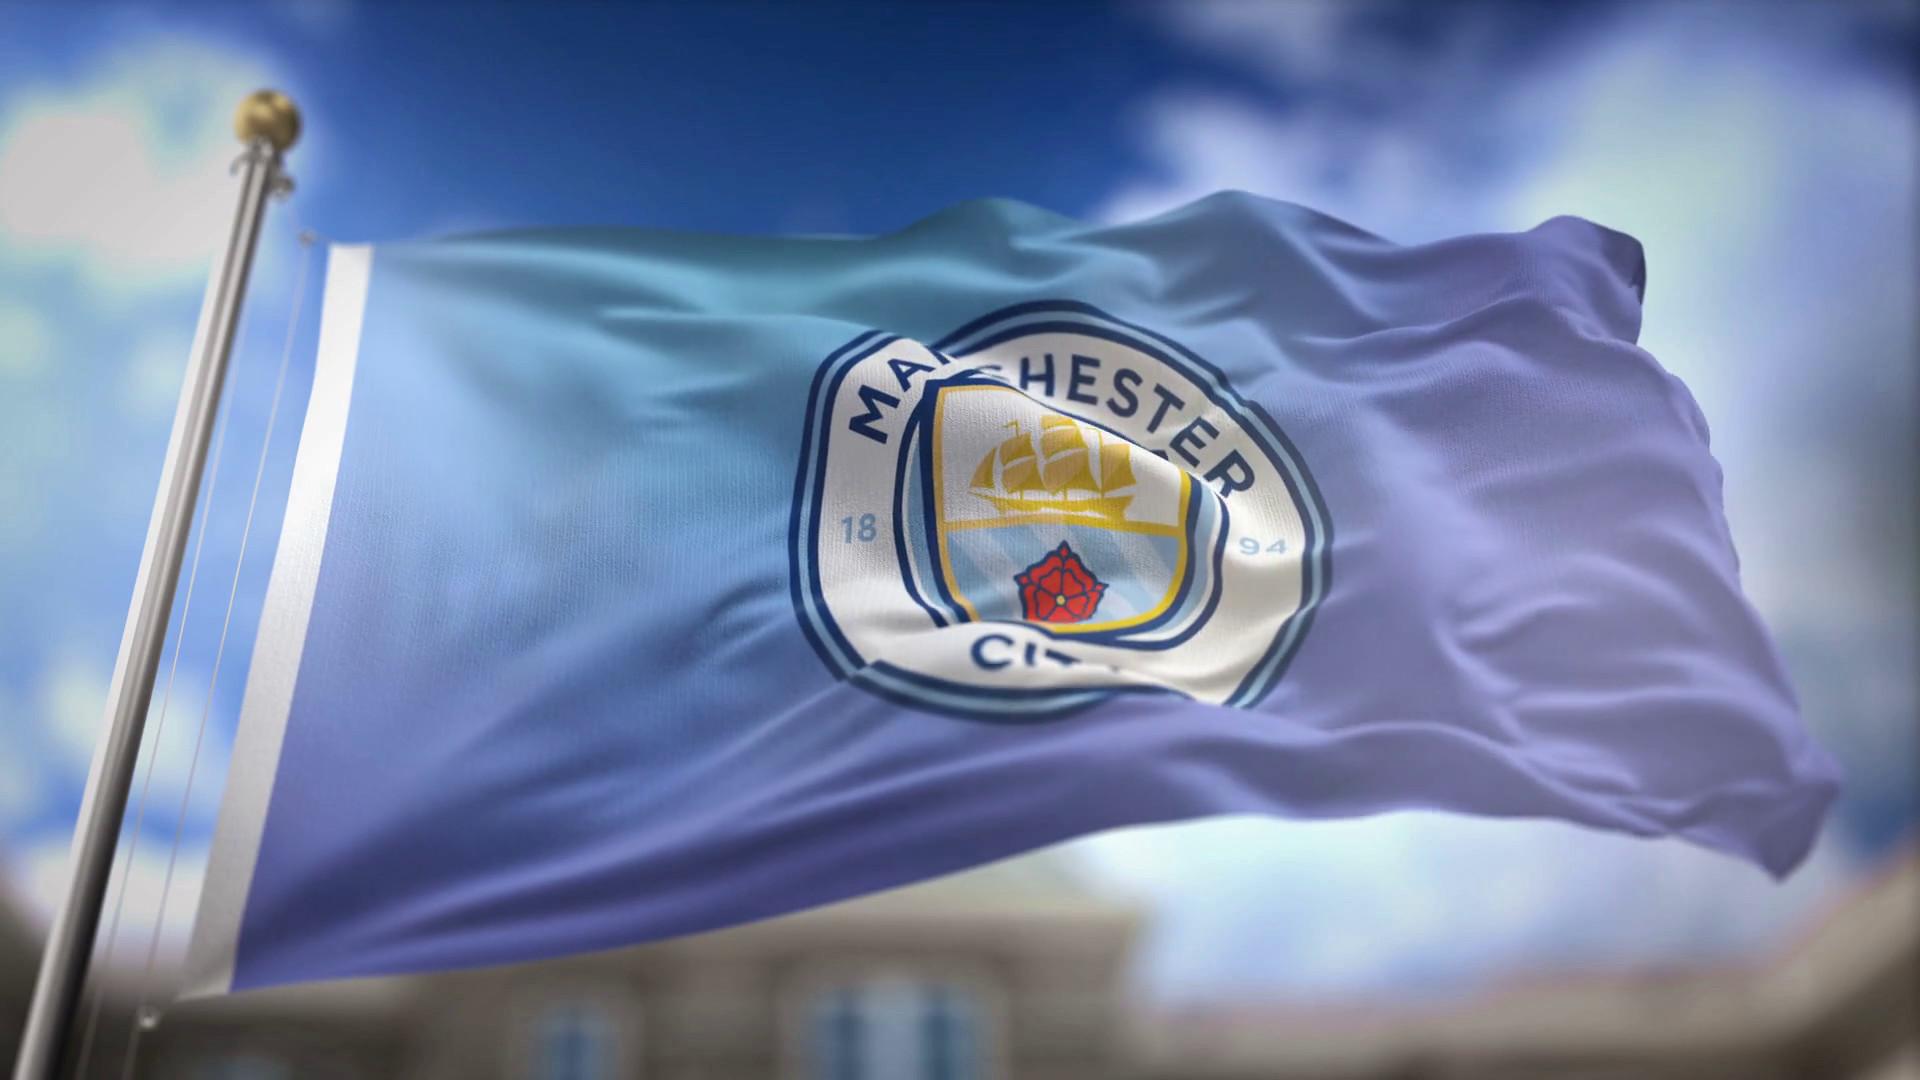 Manchester City Background